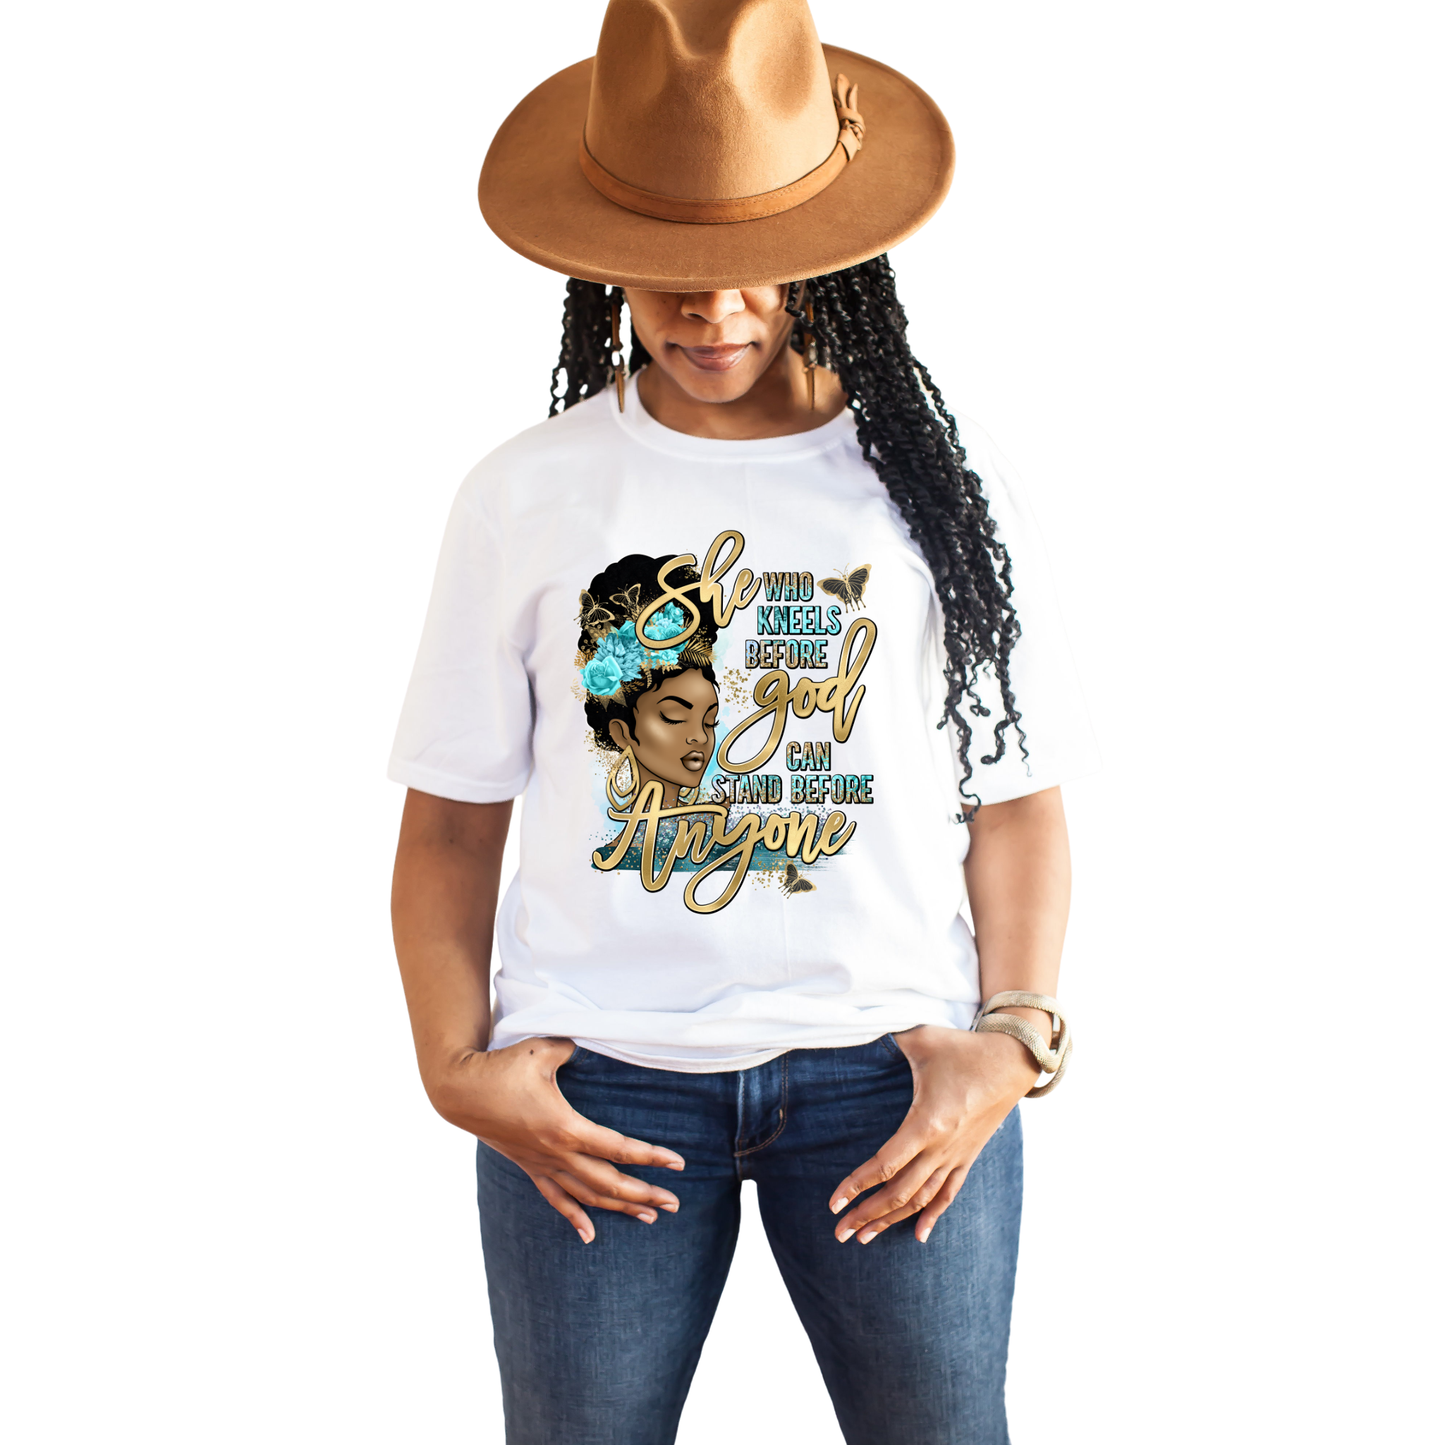 She Who Kneels before God T-Shirt Custom T-Shirt Bambi Rae Collections Small Turquoise and Gold 